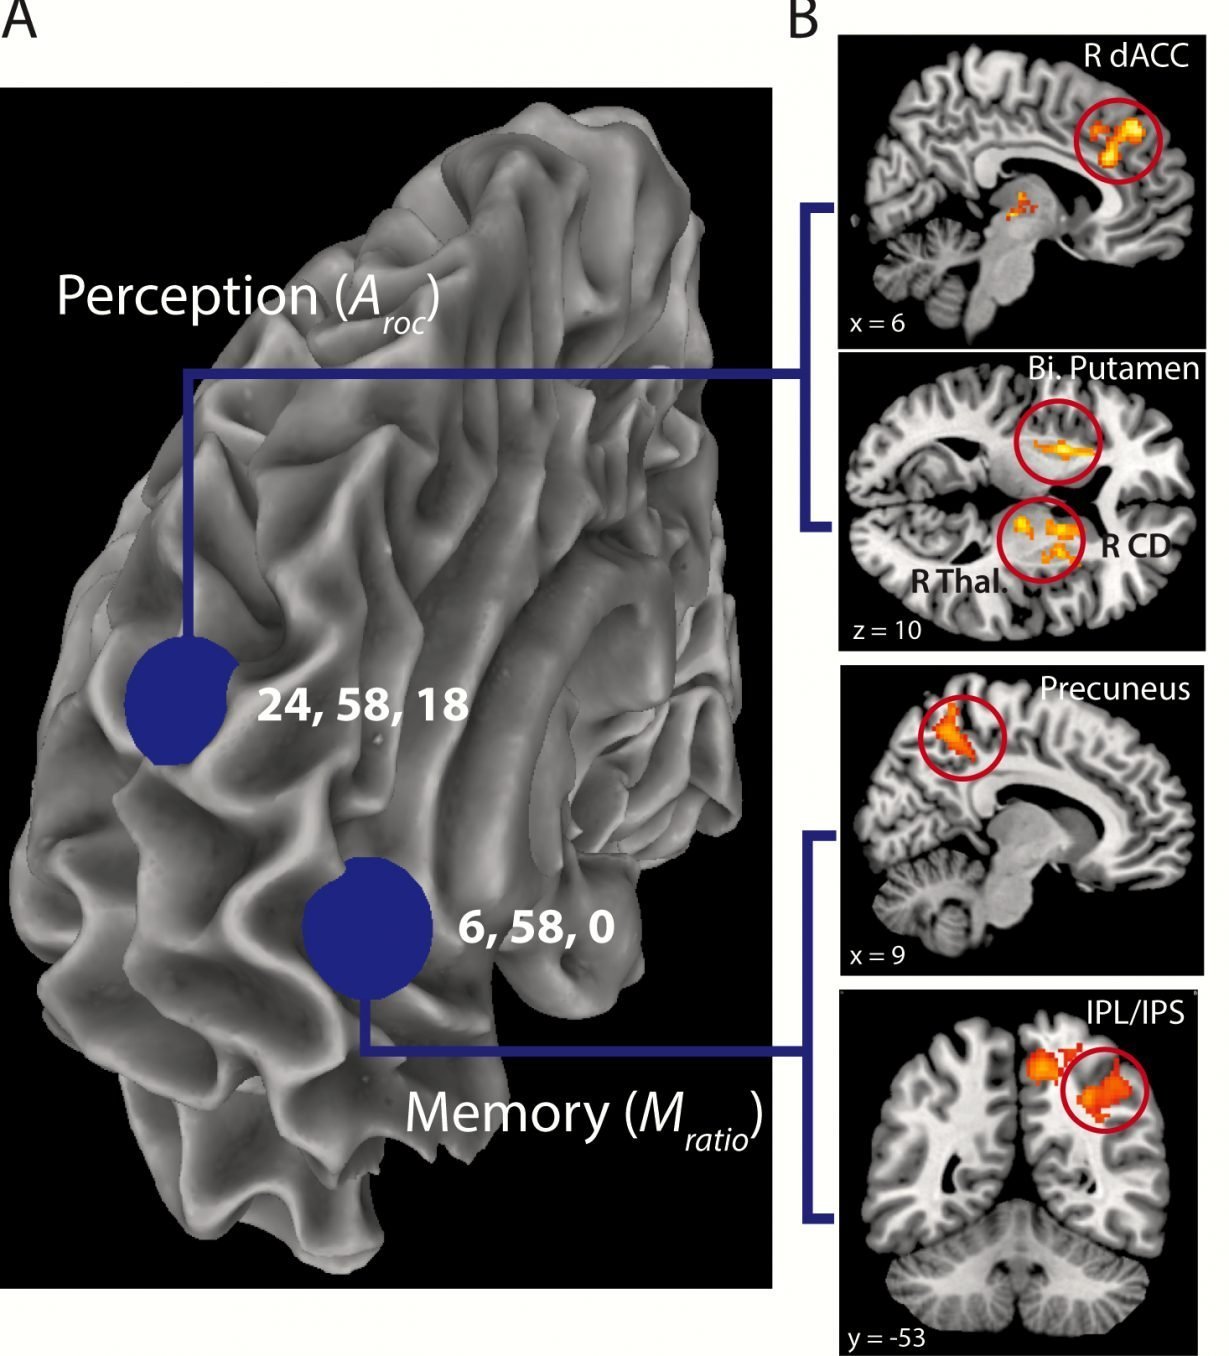 The image shows the fMRI results for the study. The caption best describes the image.